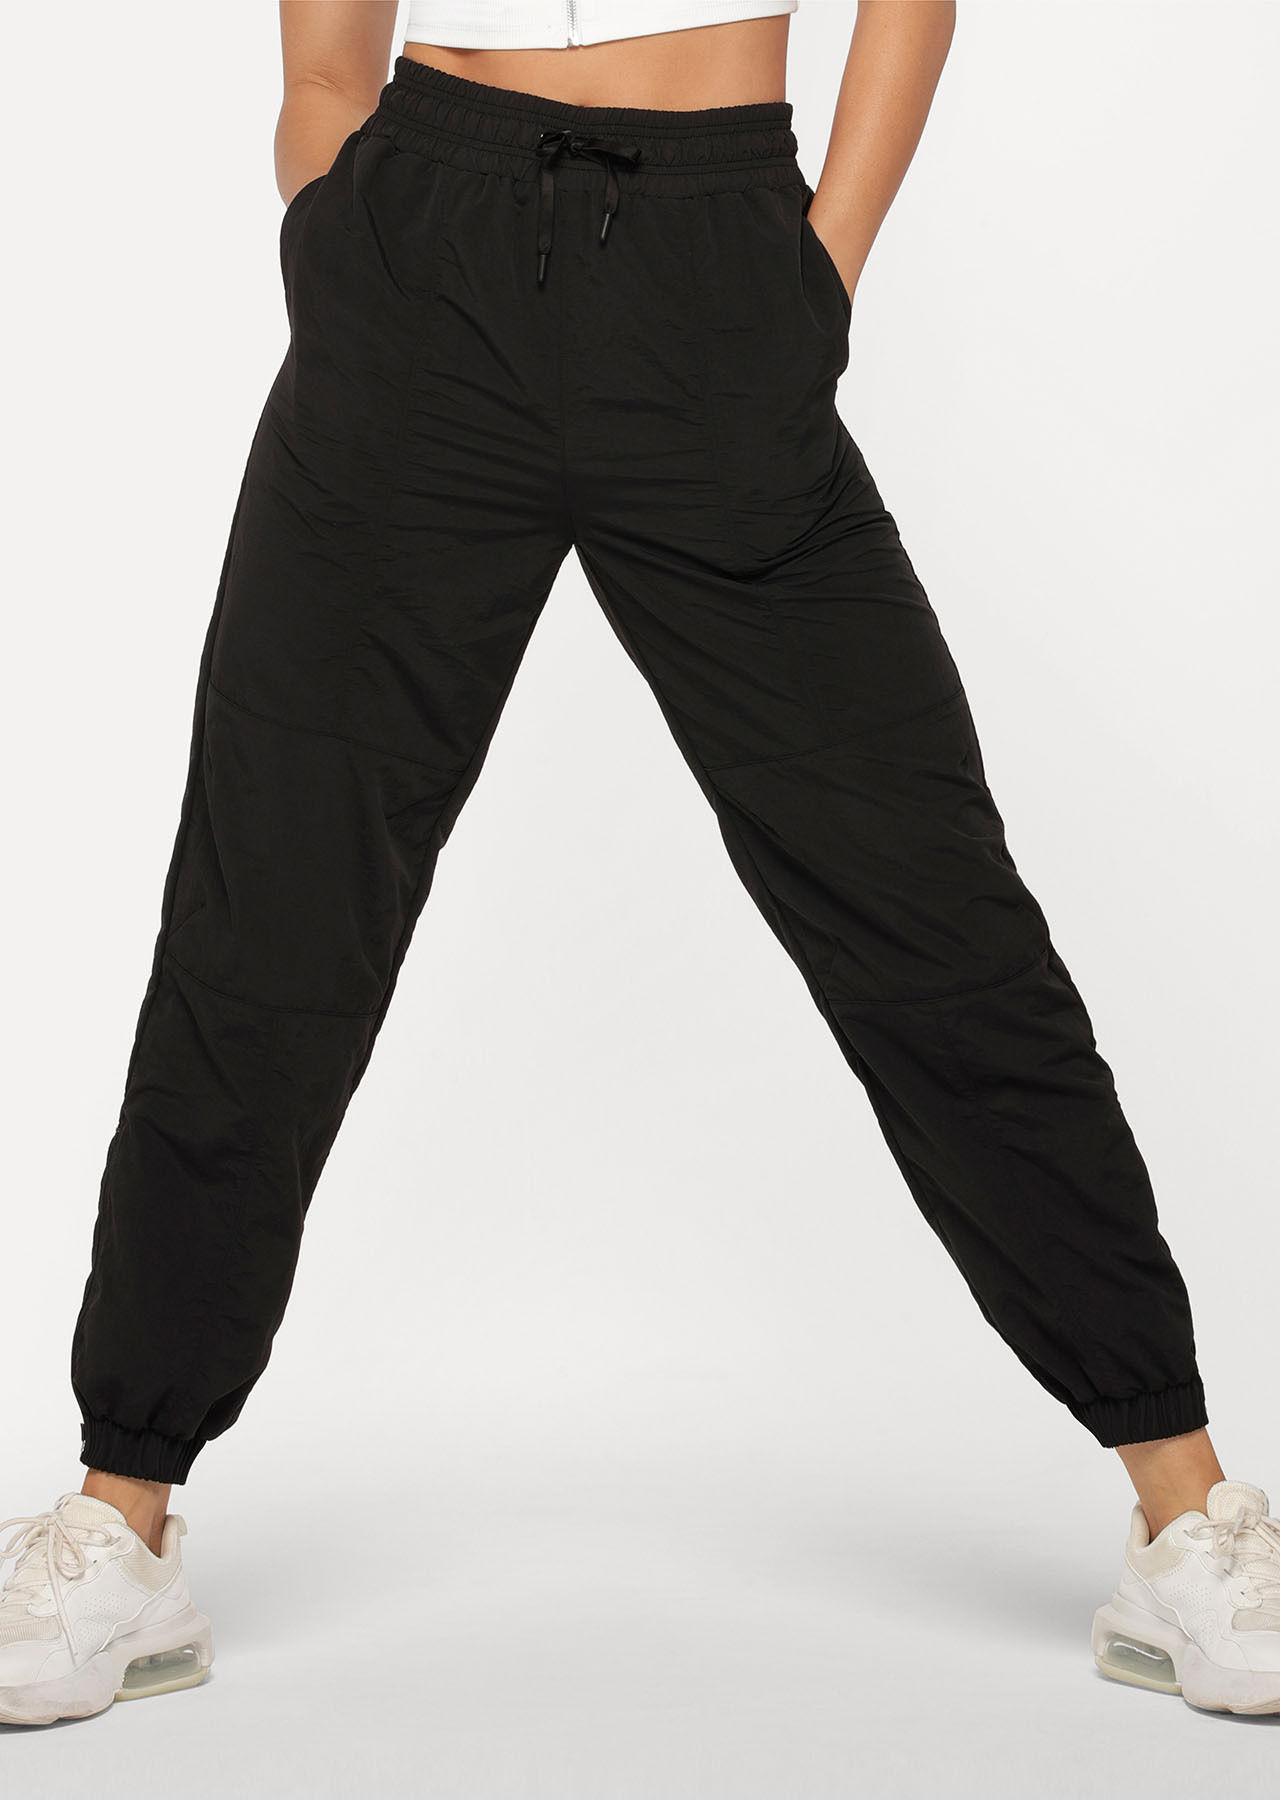 all in motion Black Active Pants Size S - 54% off